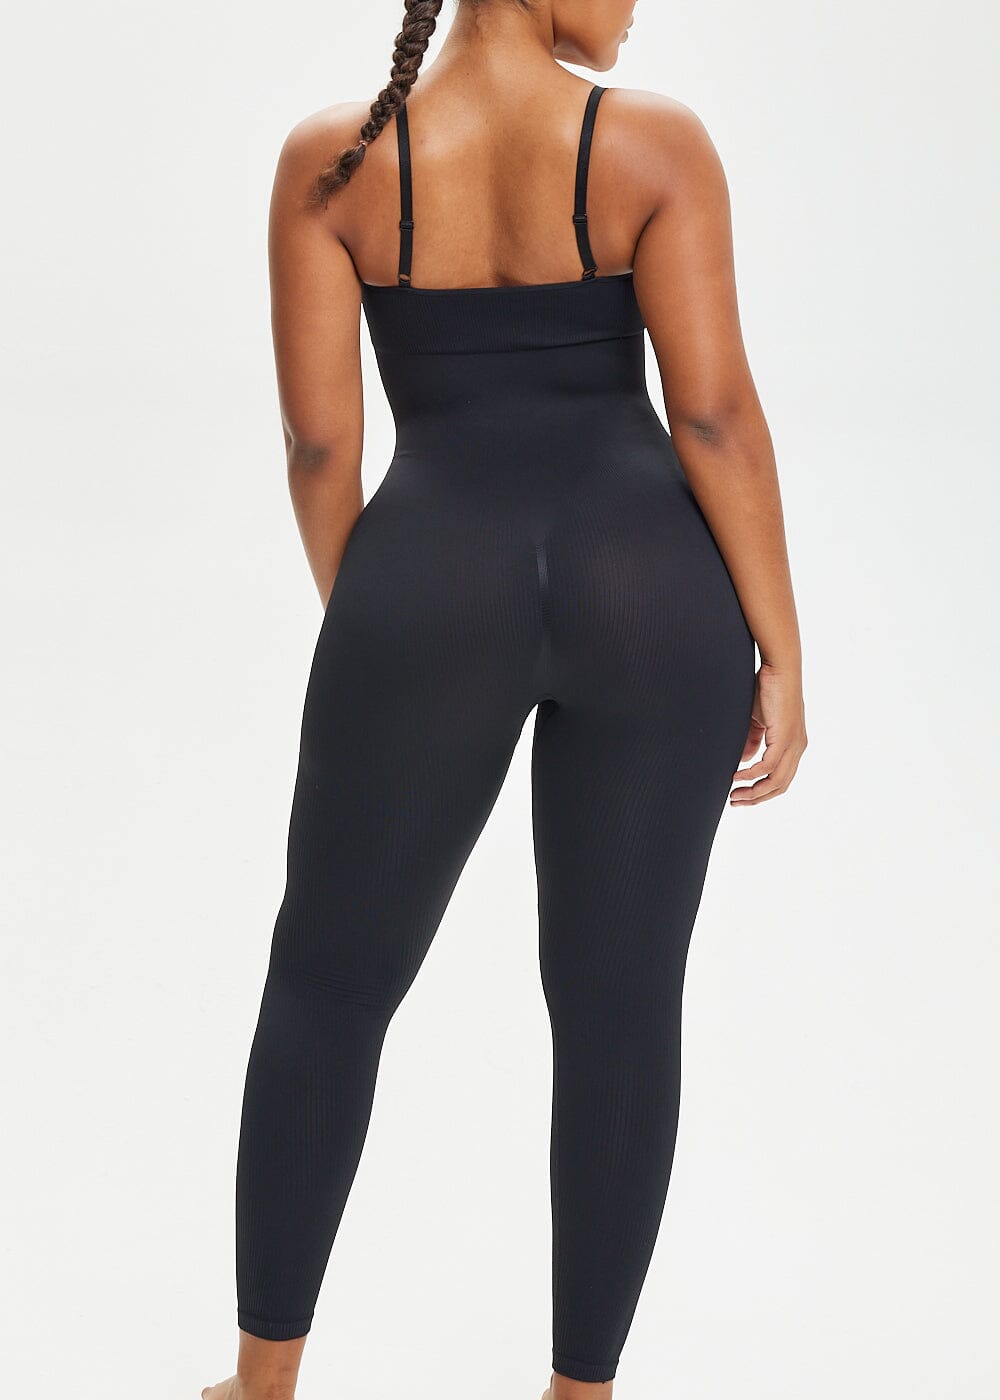 I'm 5'2 and a size 32H – I found an  jumpsuit that makes my body look  snatched and my boobs perky